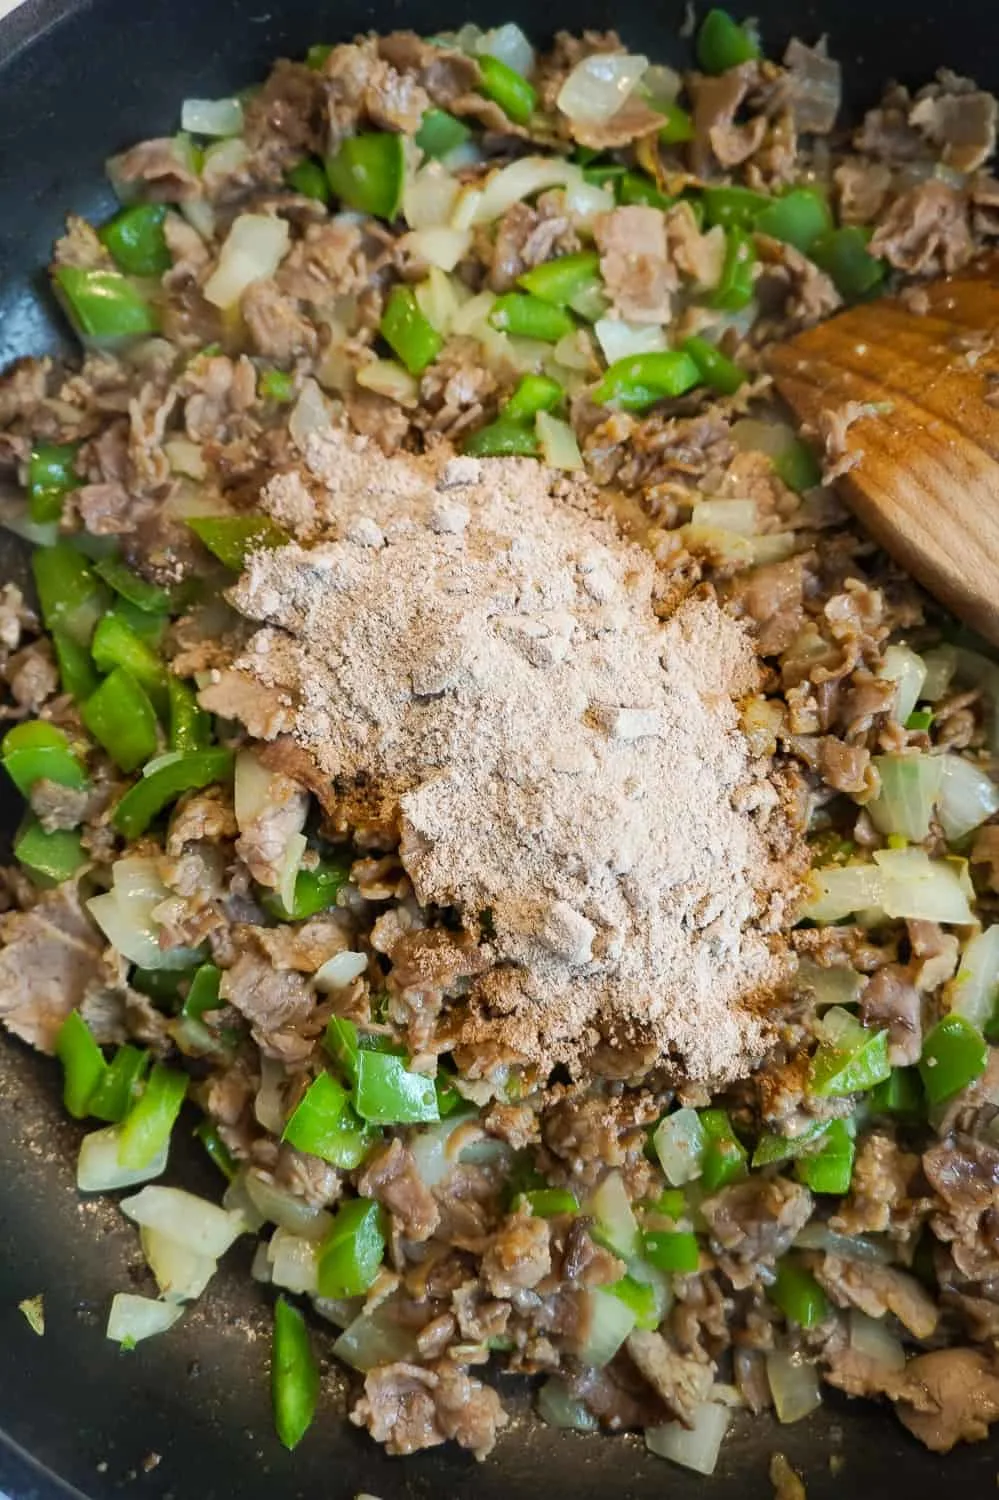 powdered gravy mix on top of diced roast beef and green peppers in a frying pan